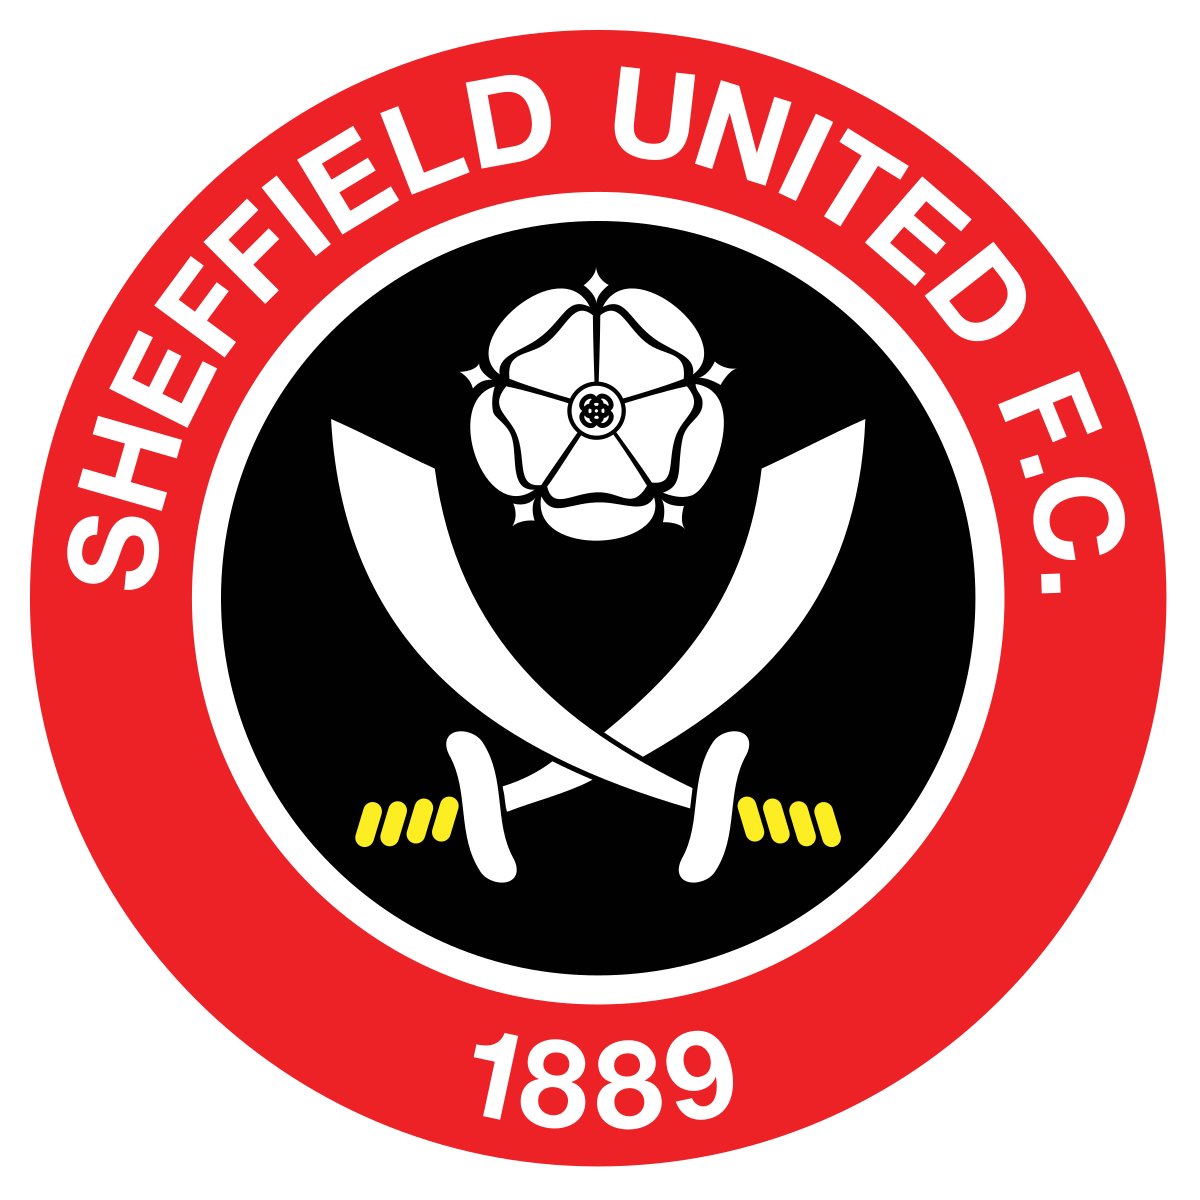 English side: Sheffield UnitedGerman side: Union BerlinNewly promoted side doing better than expected (currently 11th in Bundesliga). No massive names in their squad either, unless you count Neven Subotic and Toni Kroos's younger brother. #SUFC  #Twitterblades